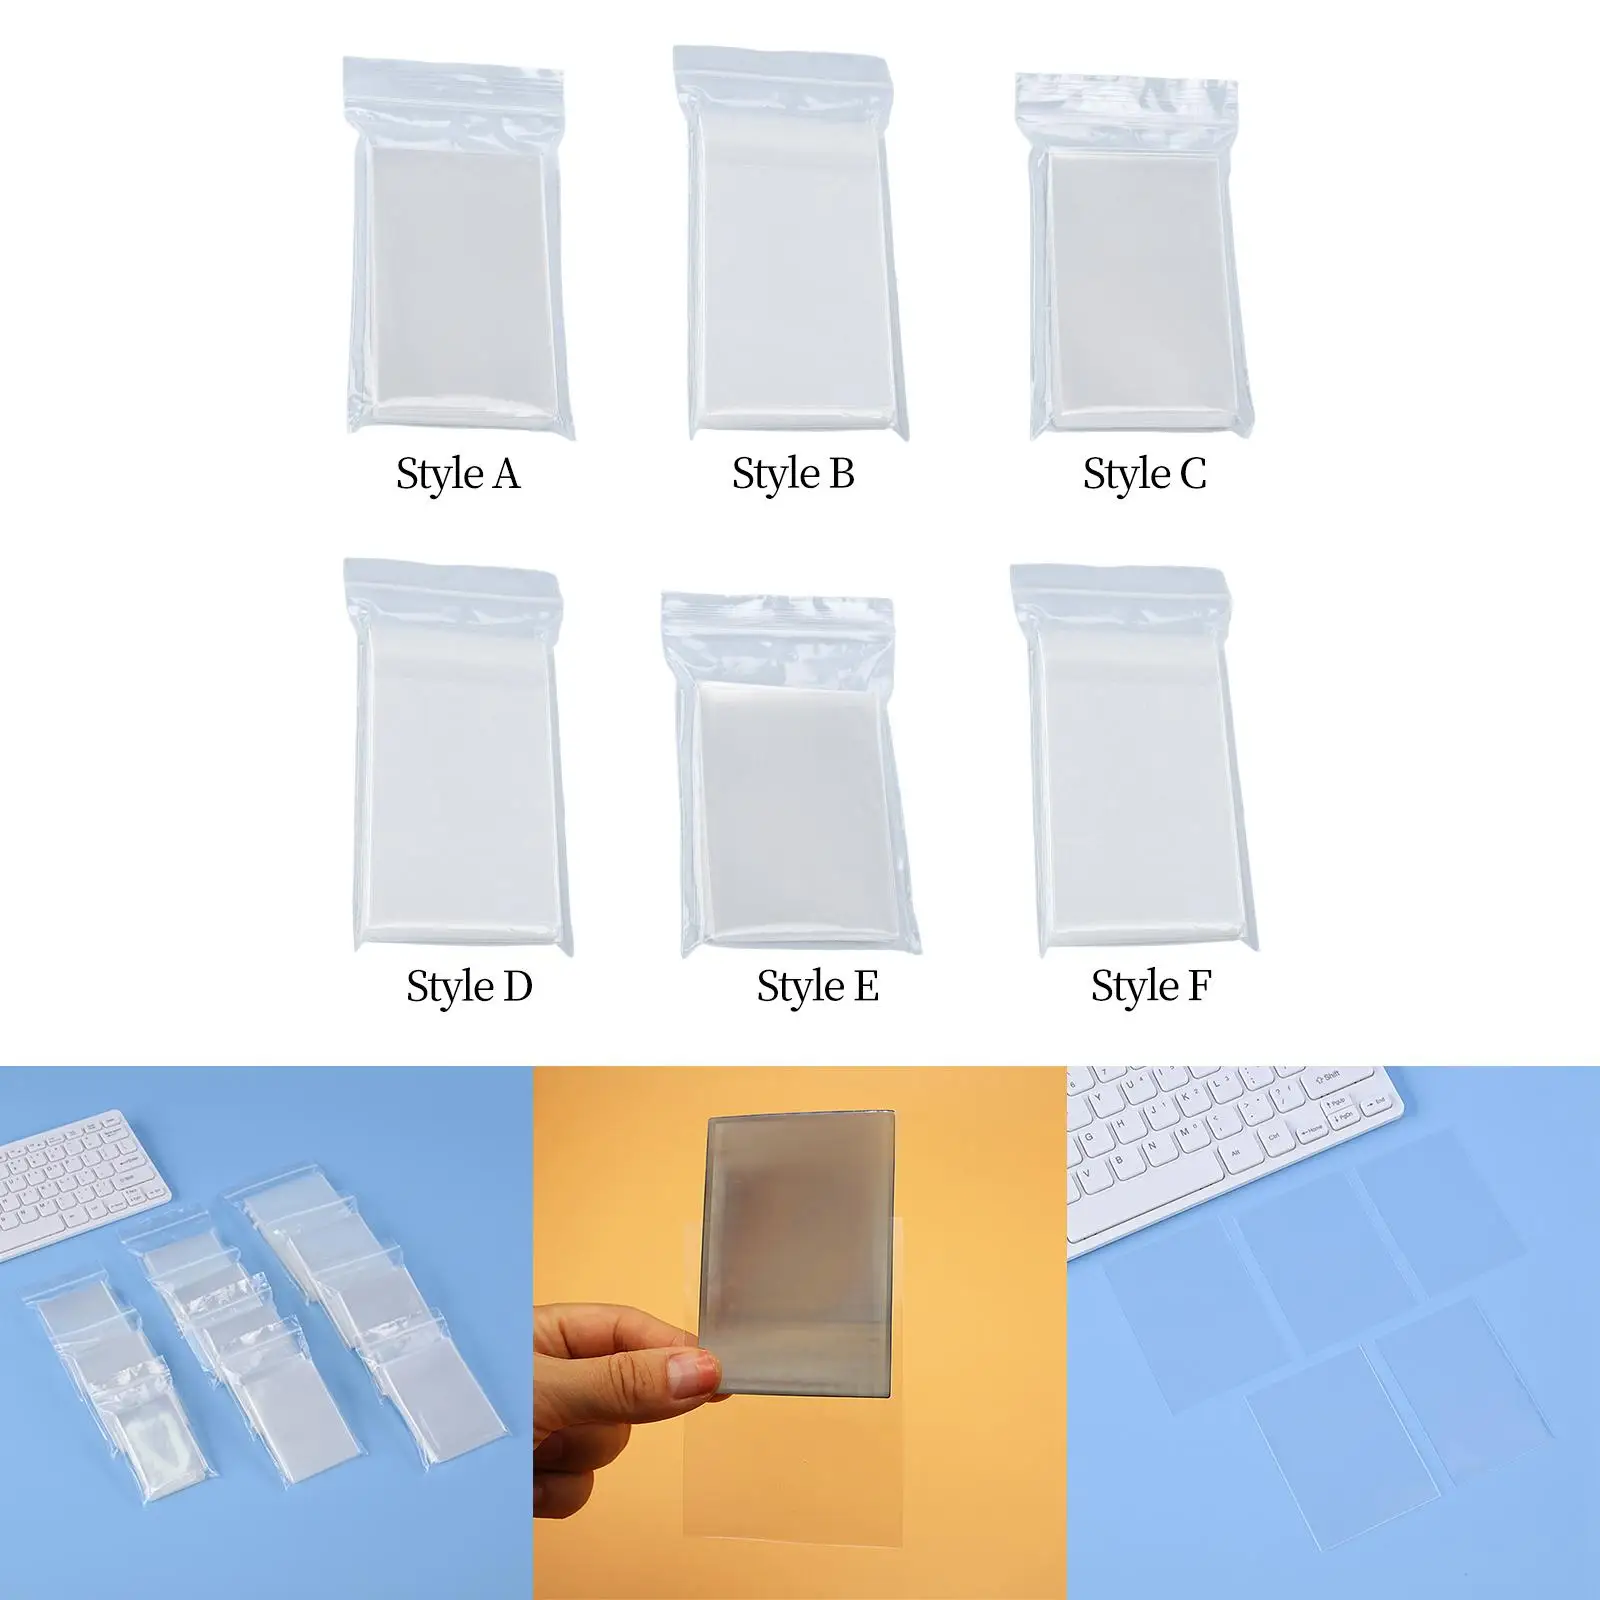 50x Card Sleeves Card Protectors for Sports Cards Collecting Card Games